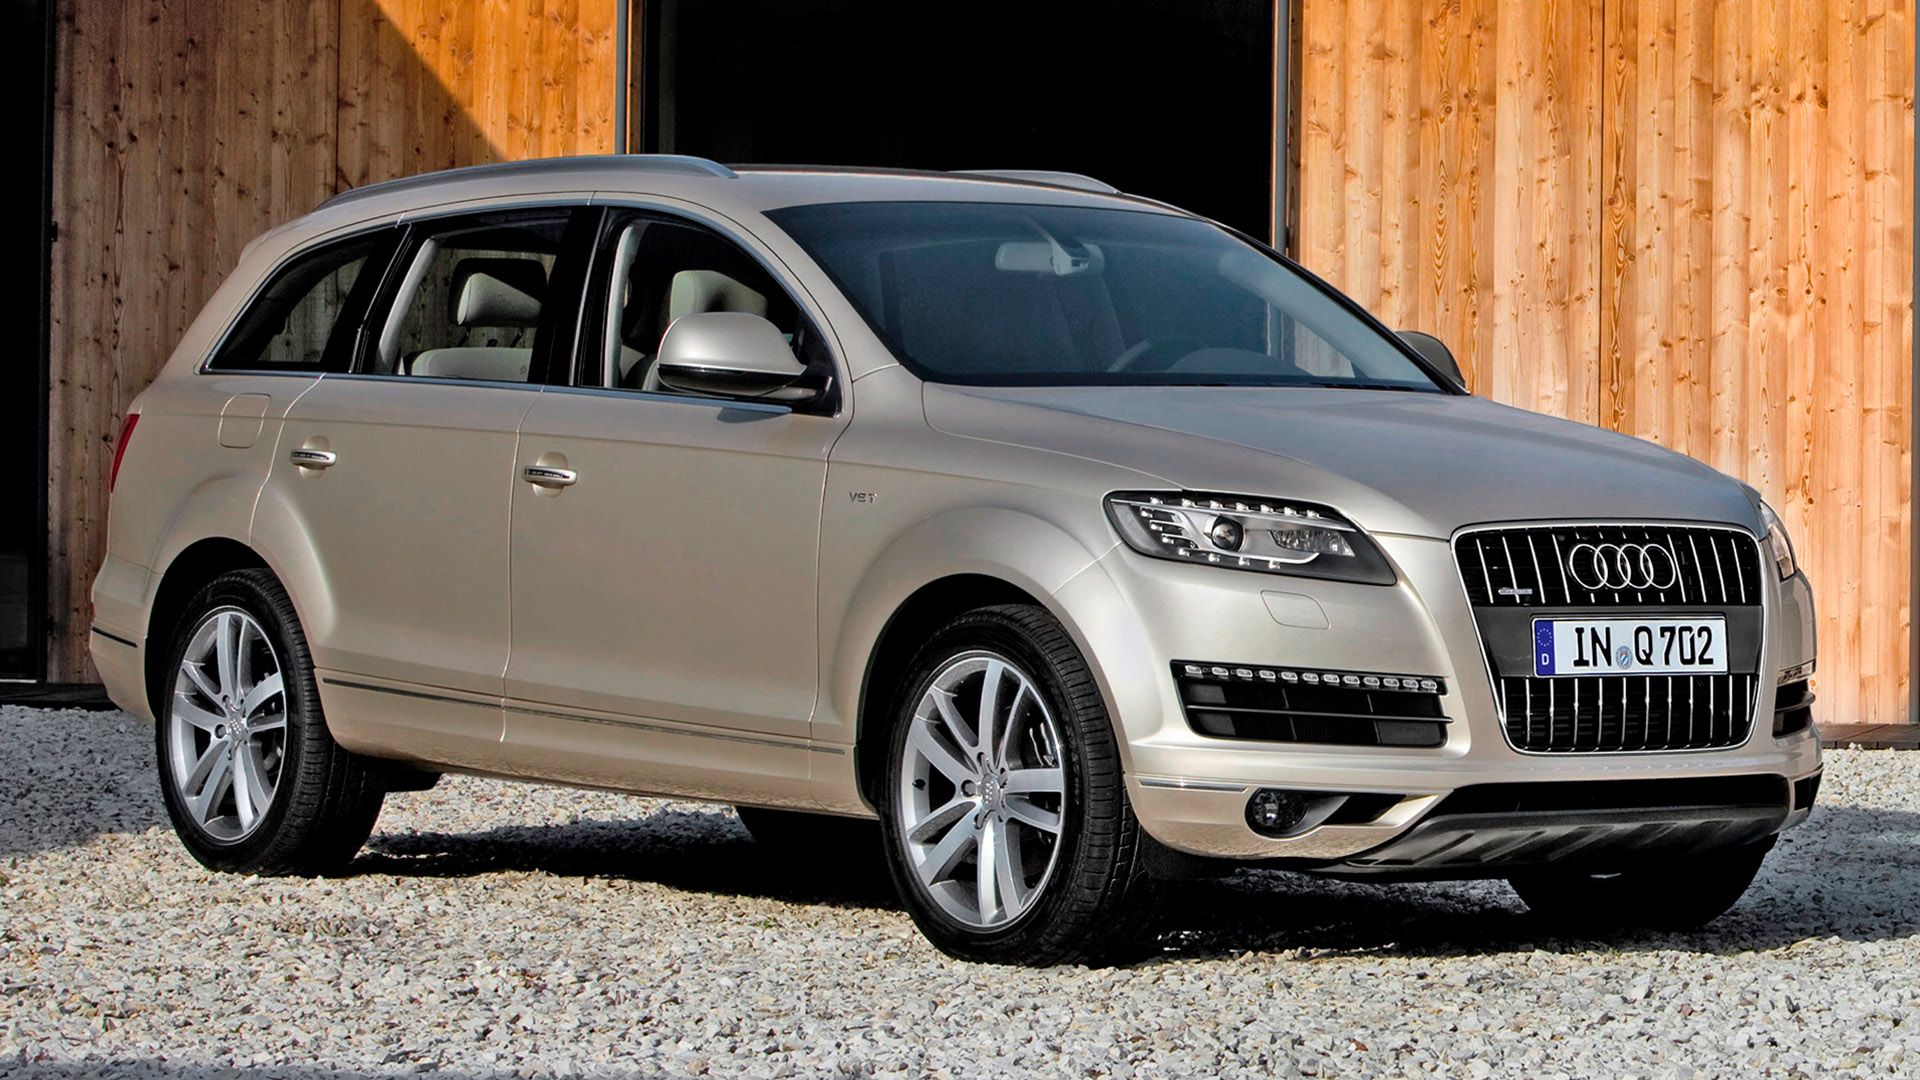 Silver Audi Q7 in front of a wooden building